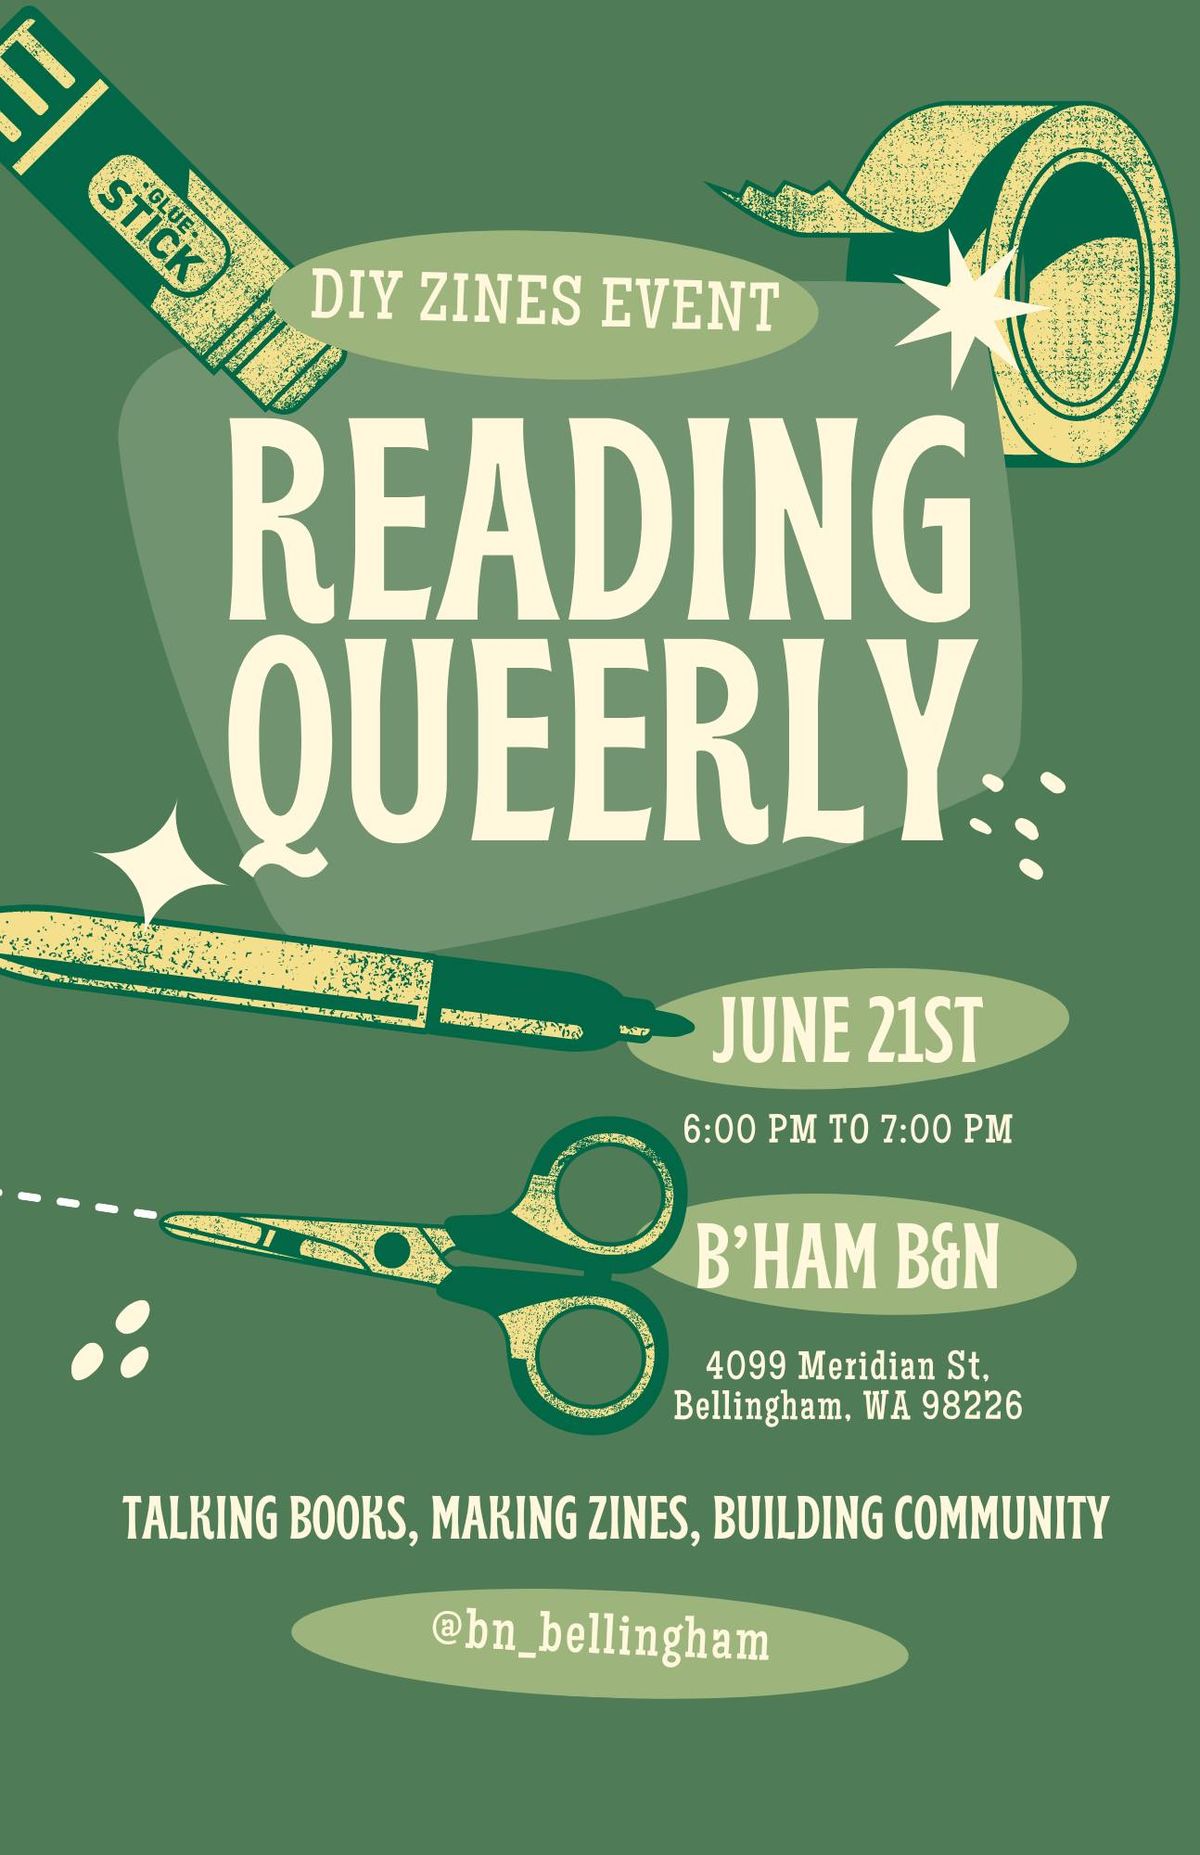 Reading Queerly Book Club and Zine Making Night